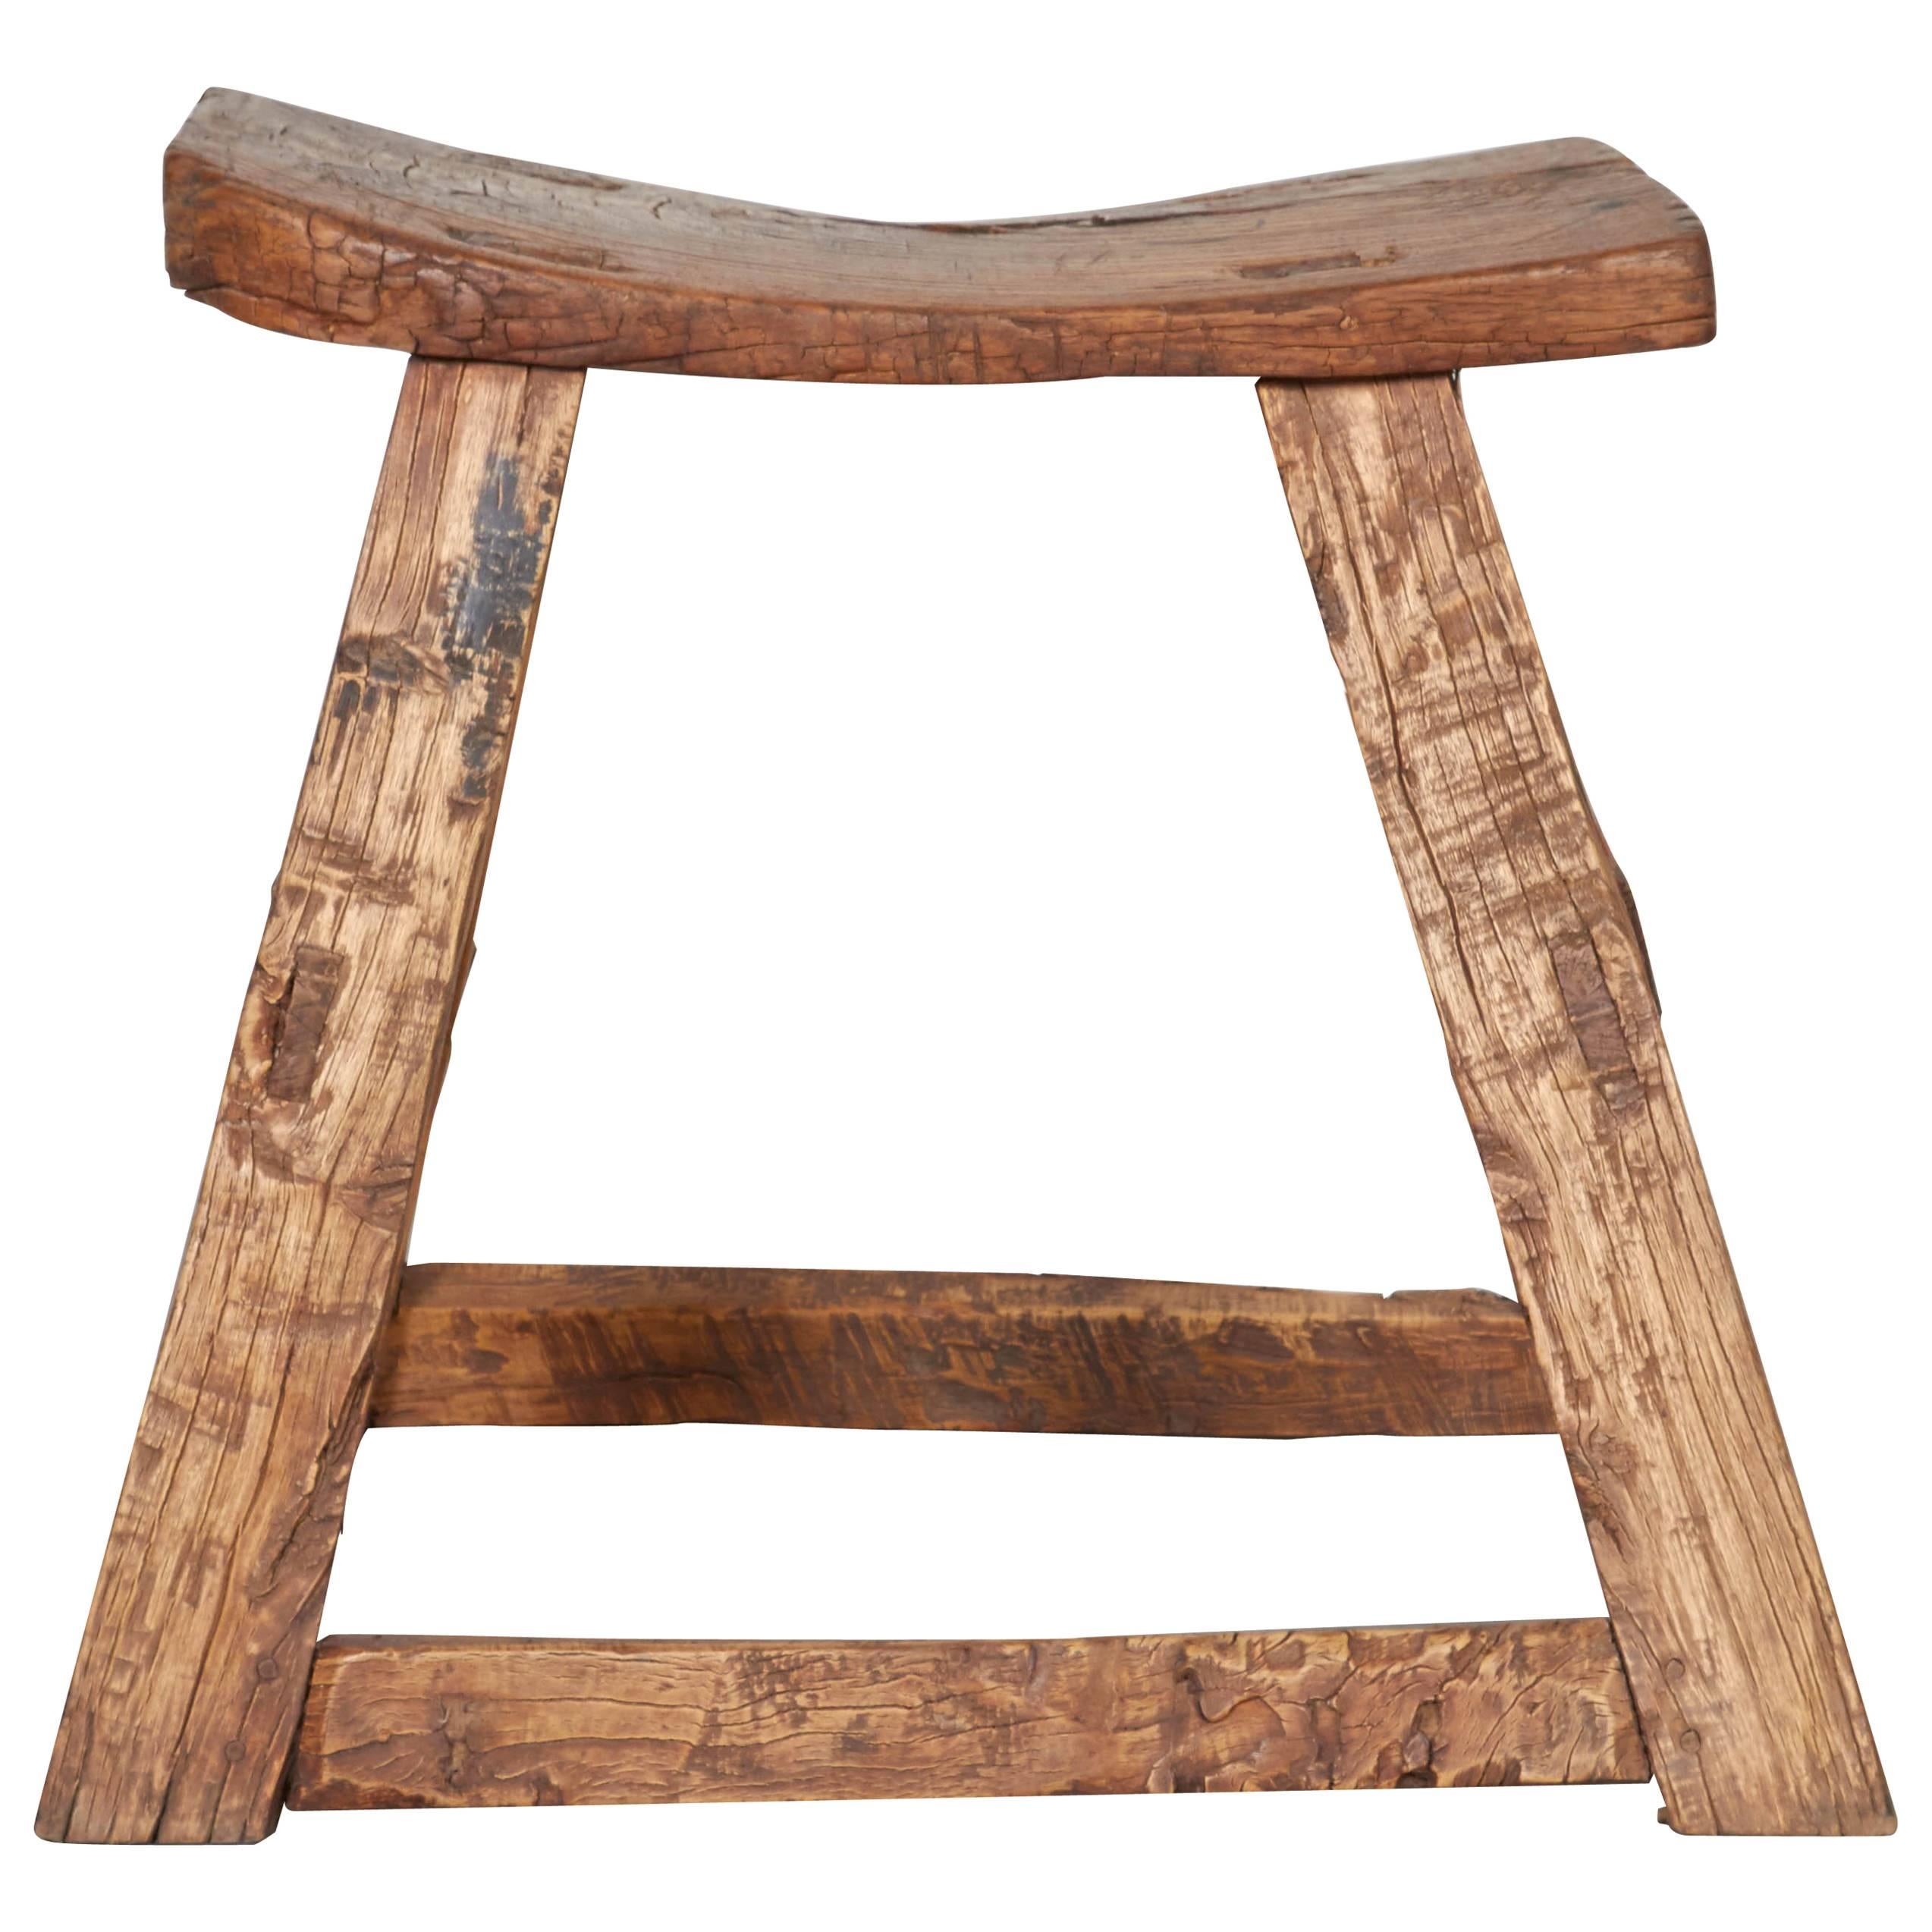 Classically Shaped Antique Chinese Stool